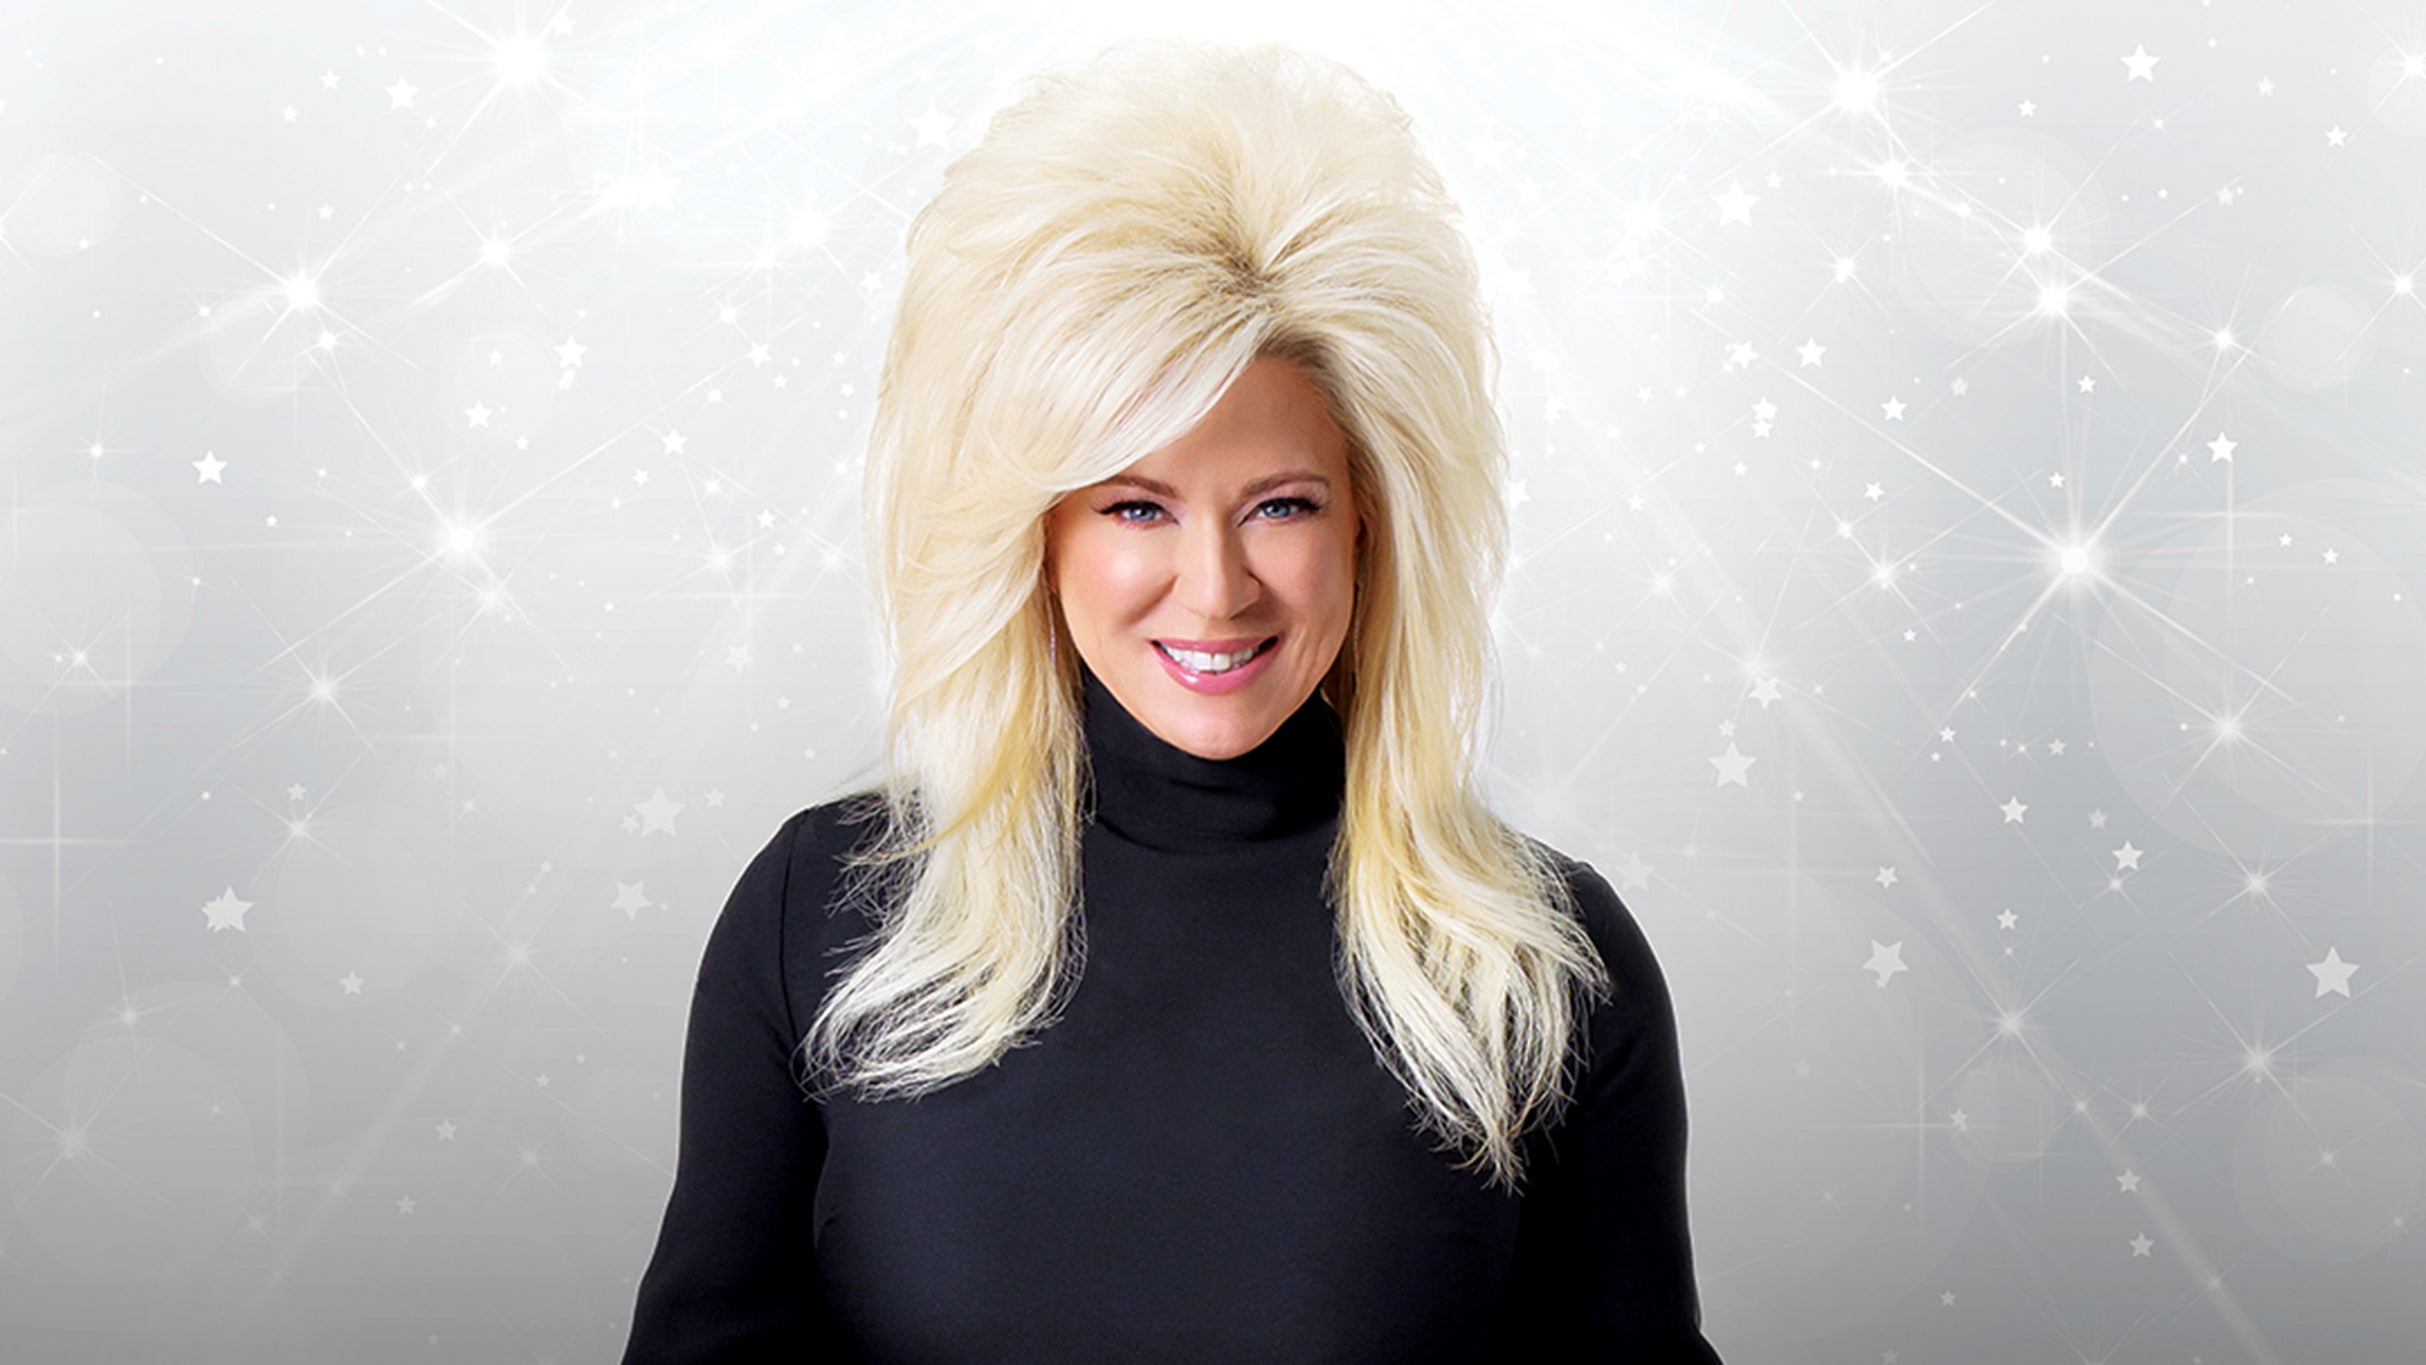 Theresa Caputo Live: The Experience in Huntington promo photo for Official Platinum presale offer code